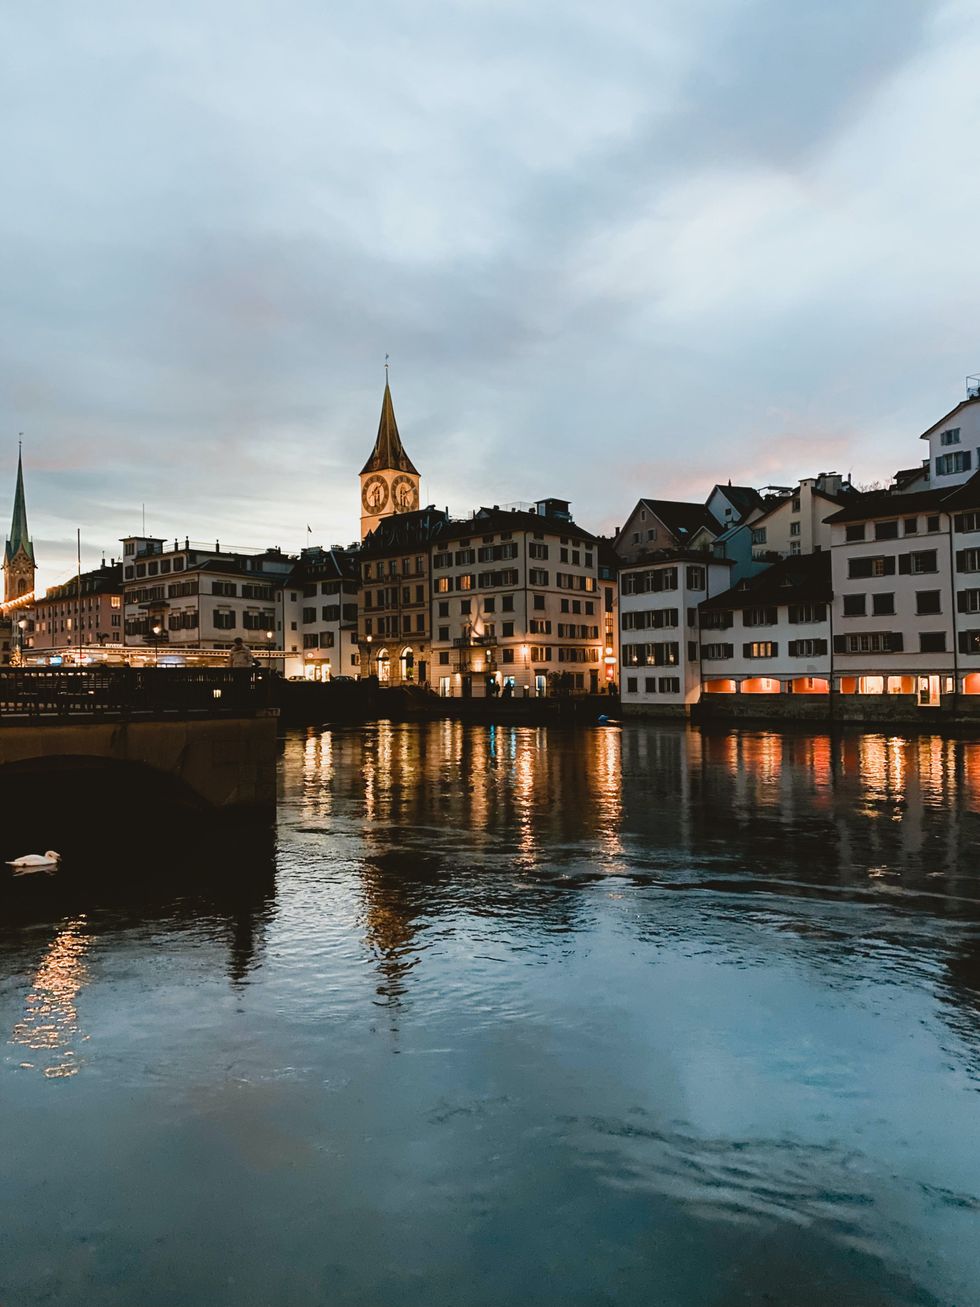 Zurich, Switzerland with the Zytglogge tower The Happiest Cities In The World